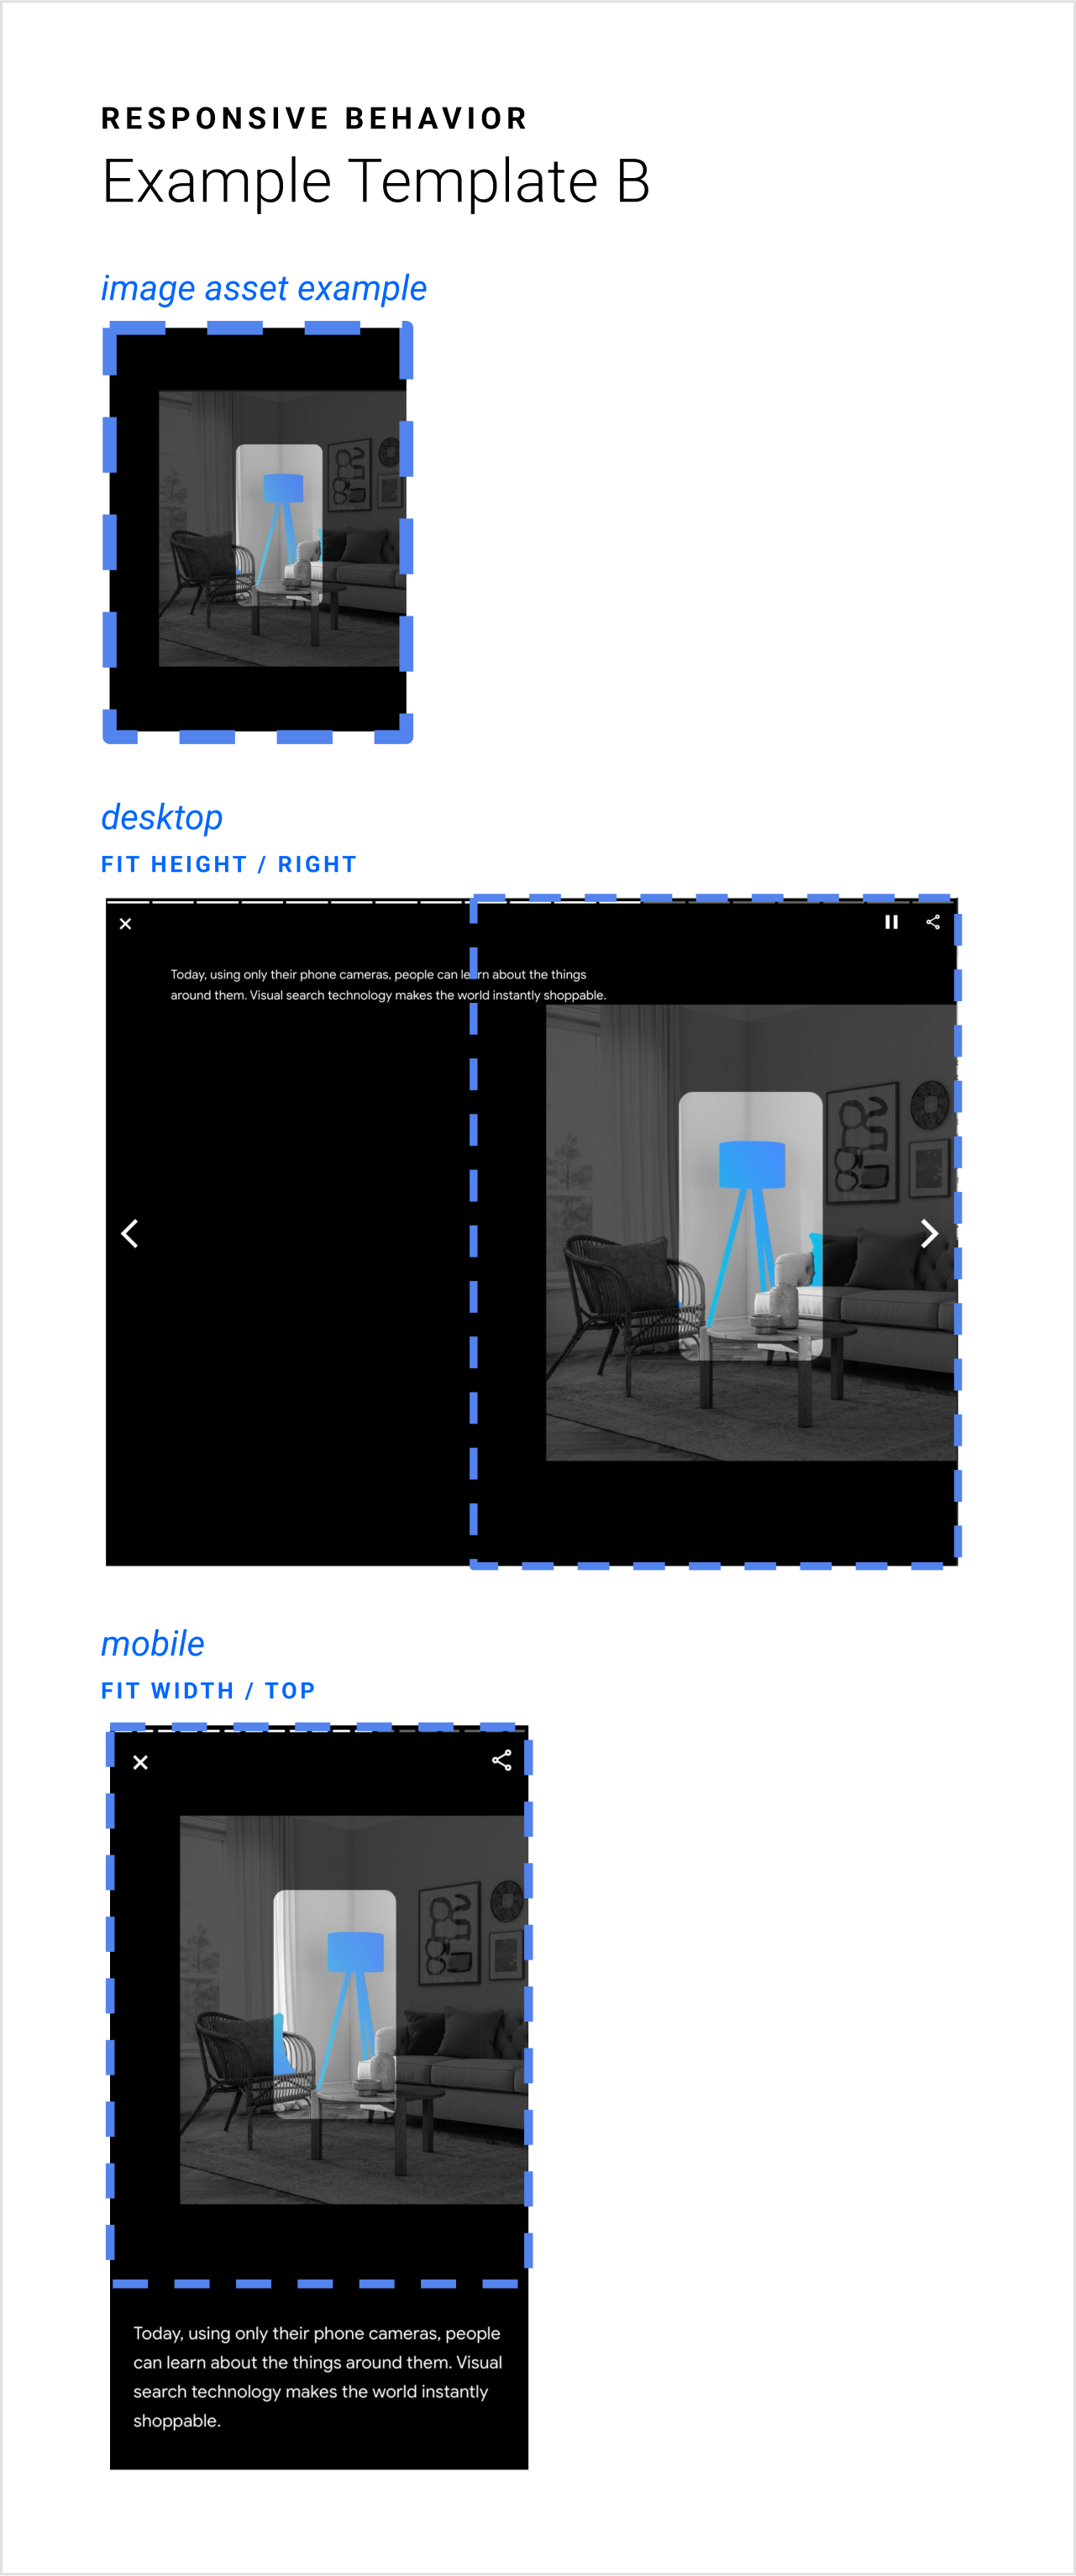 In this responsive template example, on larger screens, the image asset fits to the height of the screen and sticks to the right side. On smaller screens, the image fits to the width of the screen and sticks to the top.